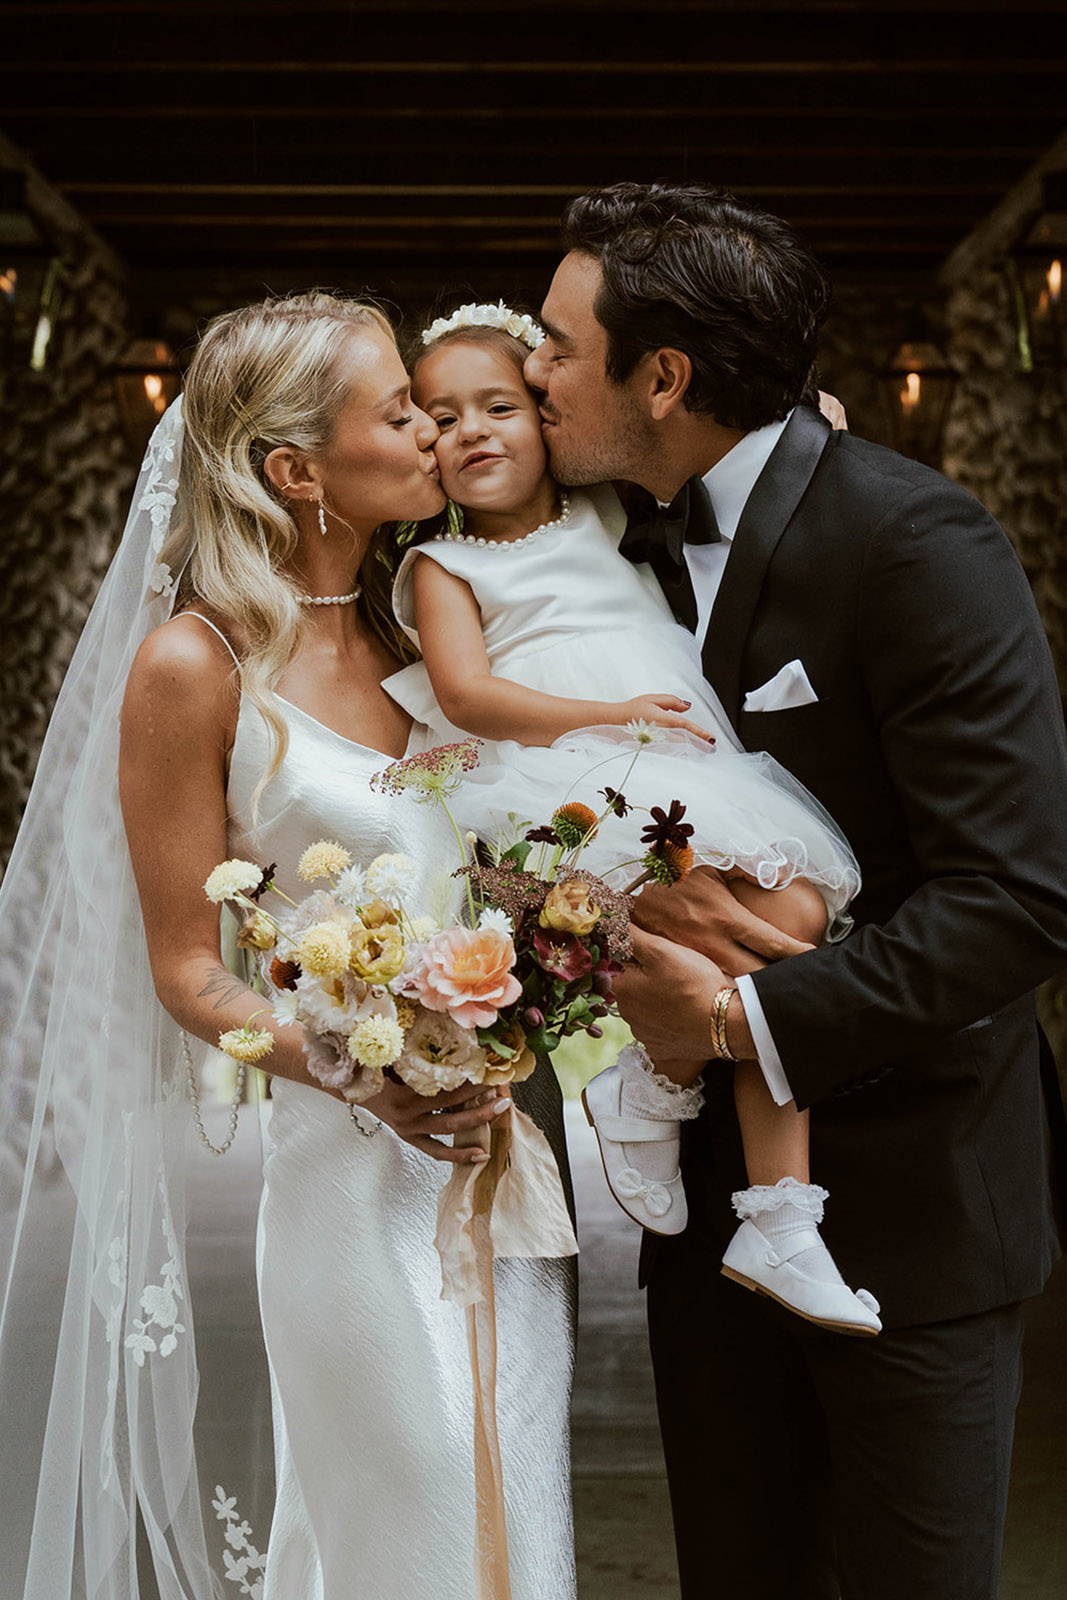 Bride and groom with their flower girl